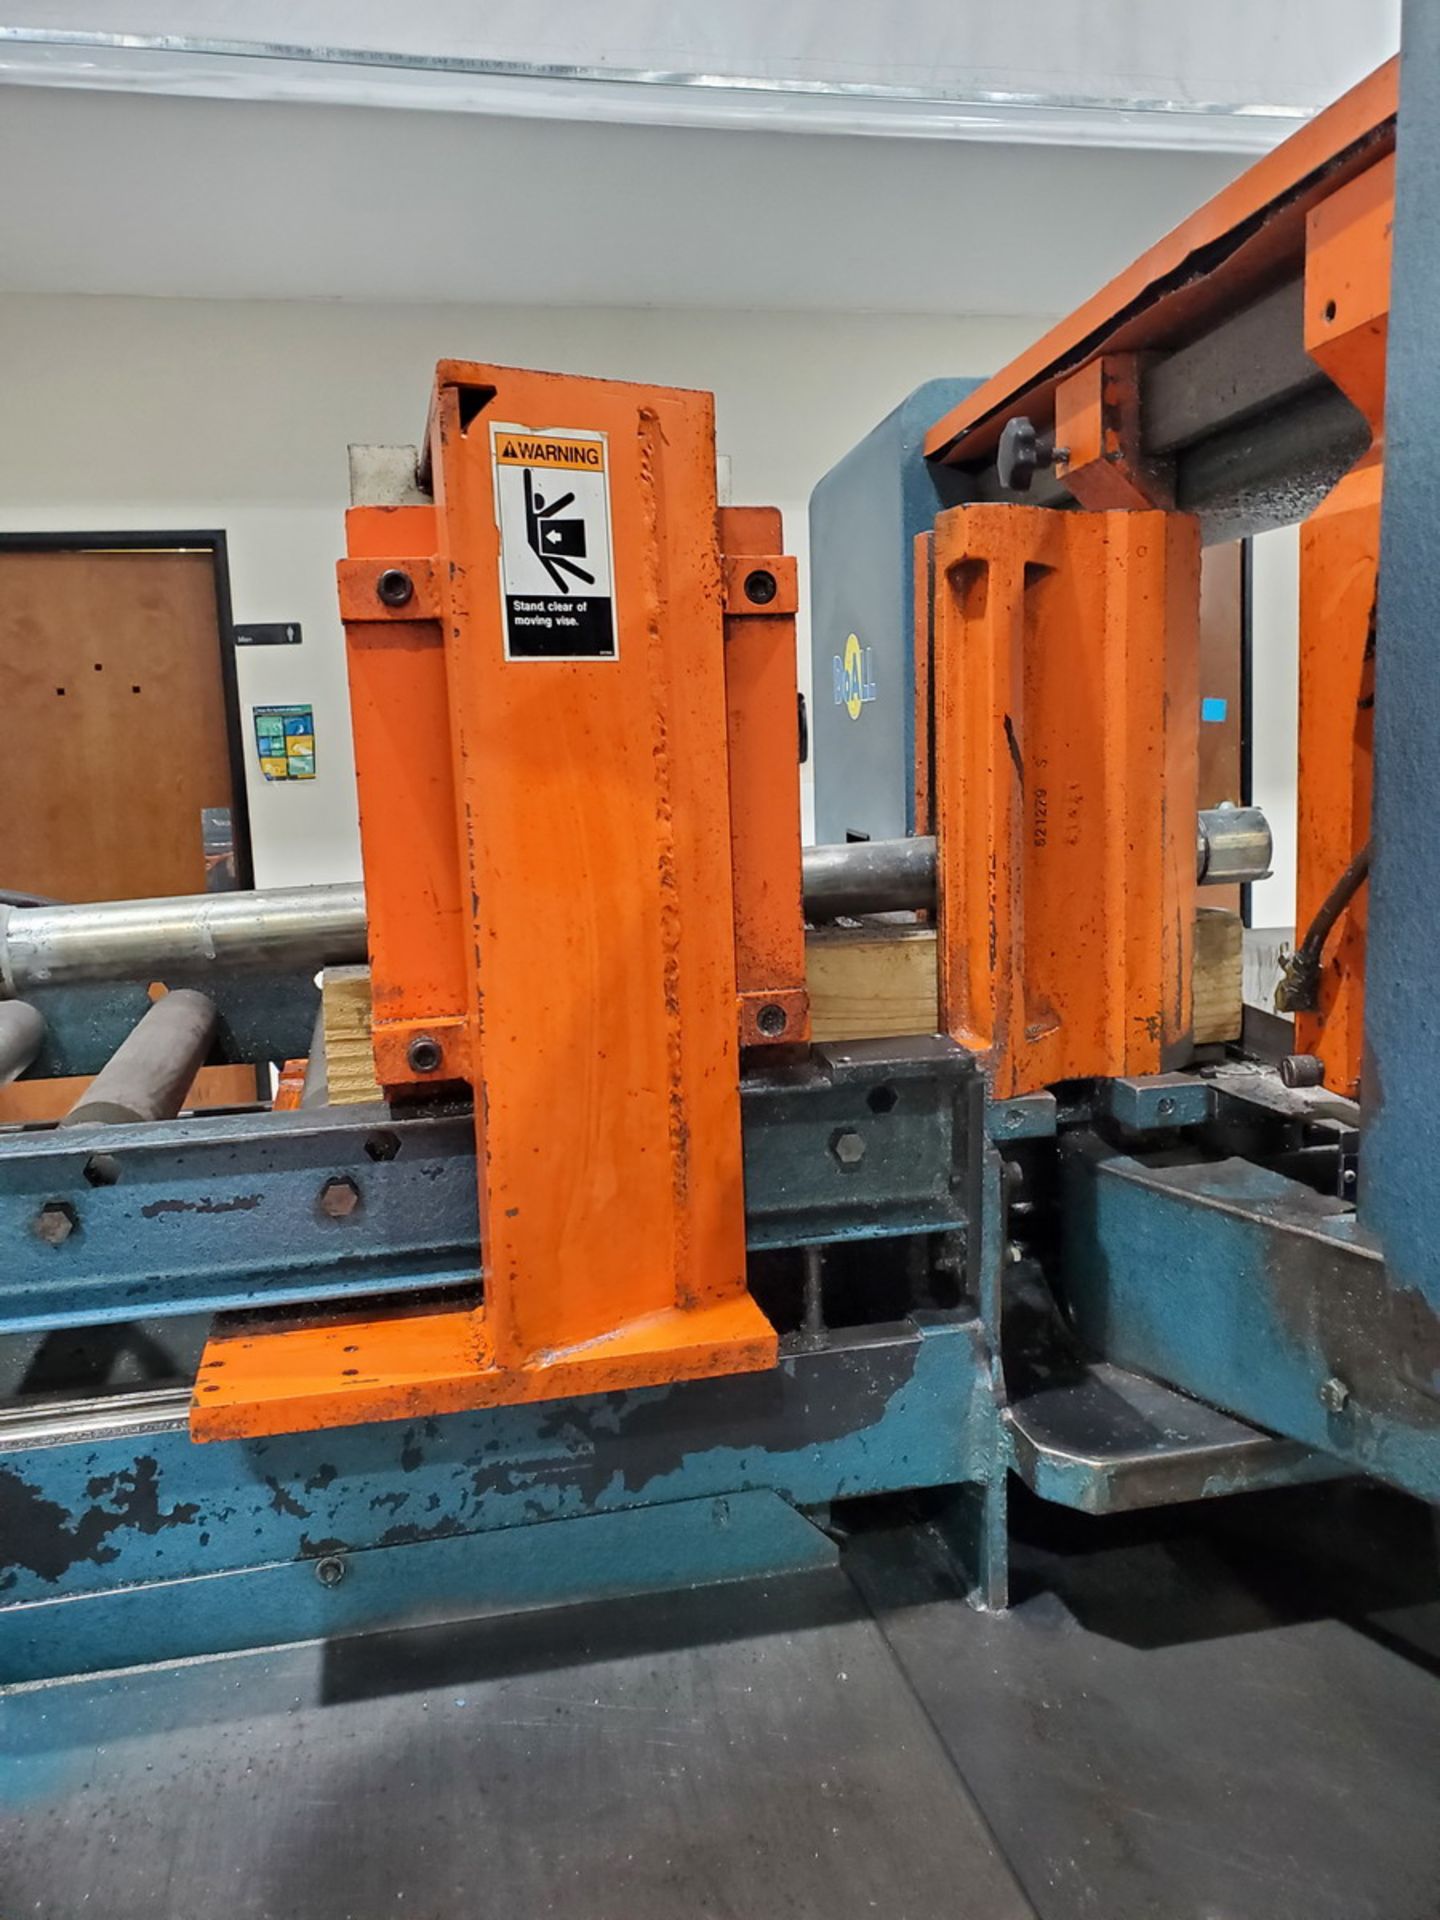 DoAll 500SNC 14" x 20" Horizontal Bandsaw (No Tag) W/ Automatic Feed, W/ Quick Panel Controller; - Image 19 of 21